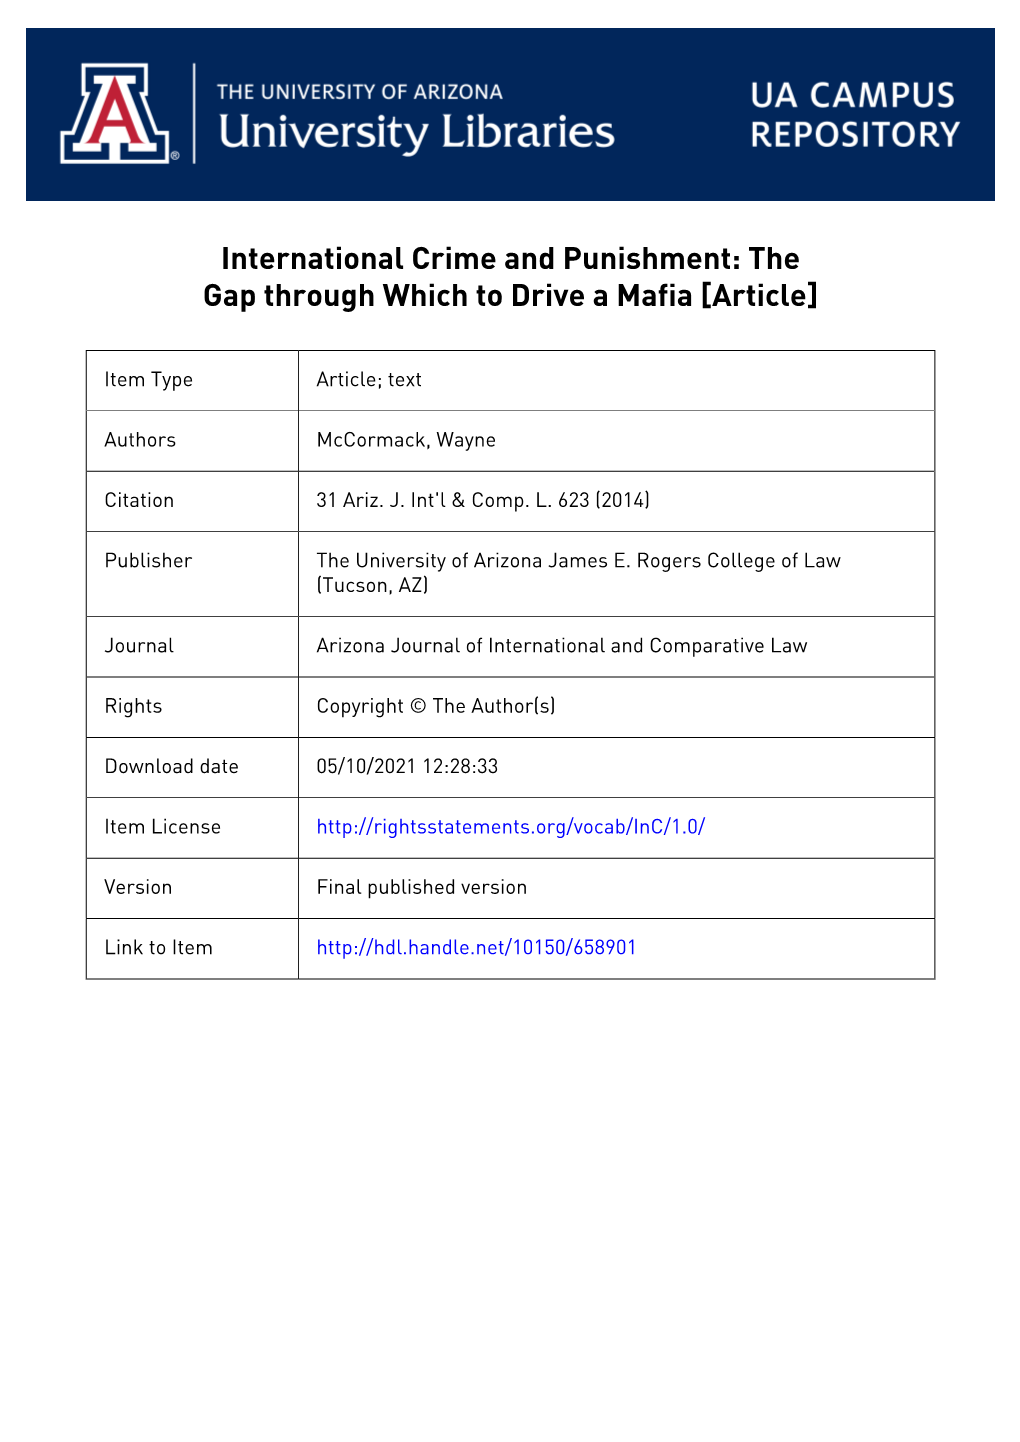 International Crime and Punishment: the Gap Through Which to Drive a Mafia [Article]